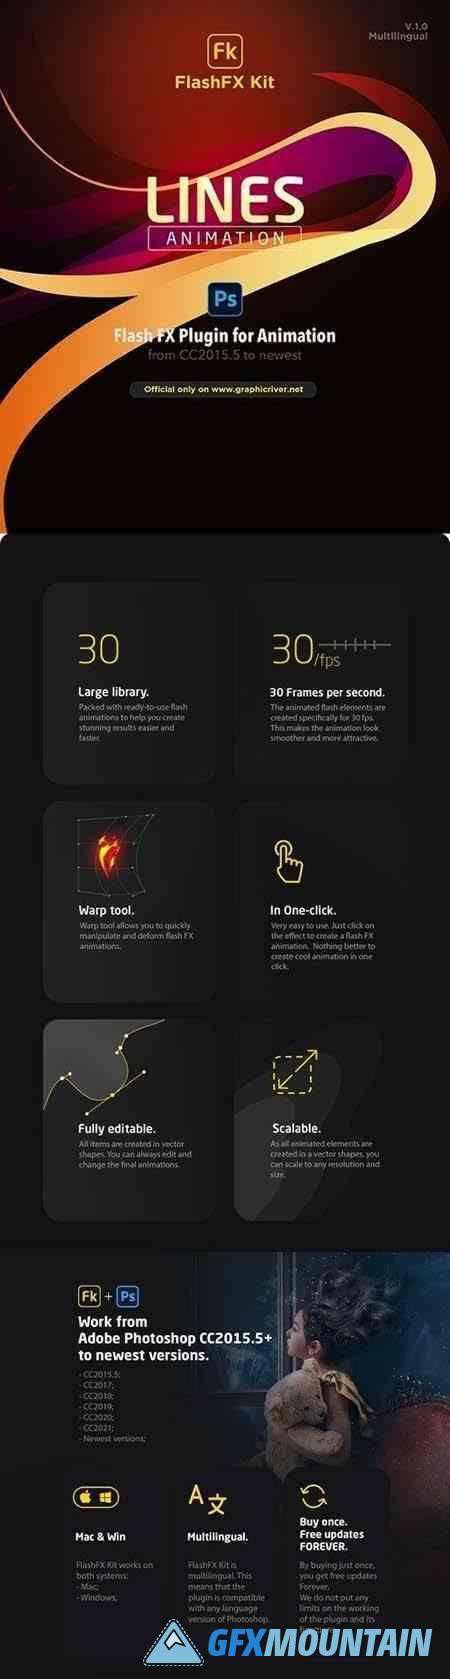 FlashFX Kit Lines Animations for Photoshop - 2d Vfx Plugin